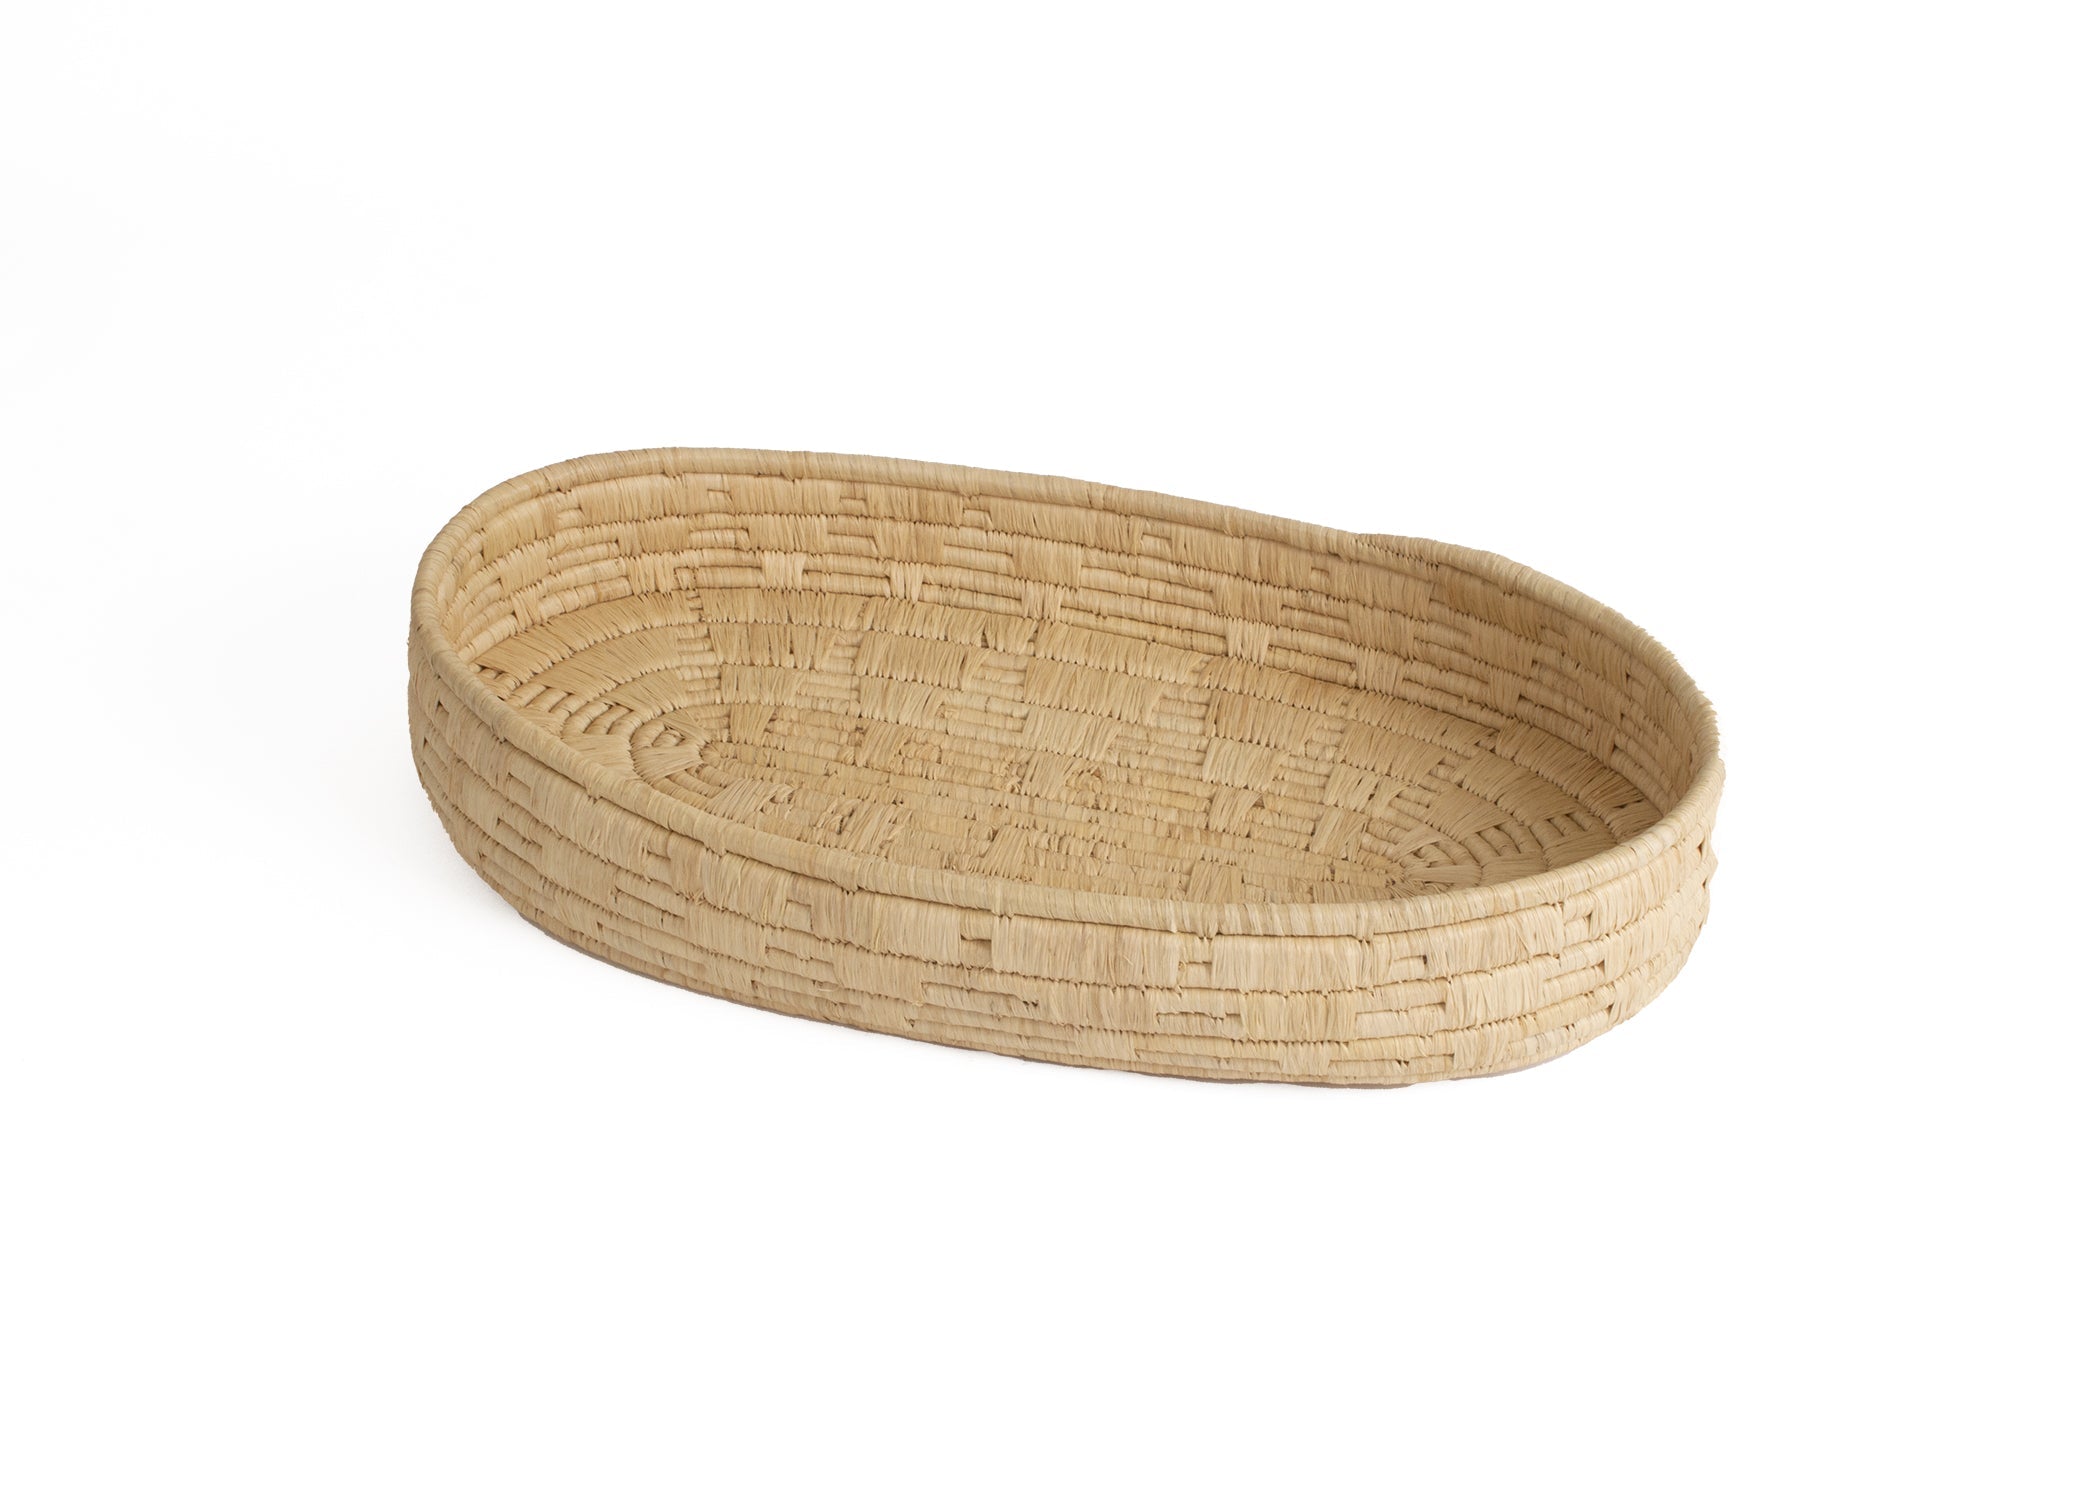 Natural Raffia Patterned Oval Tray